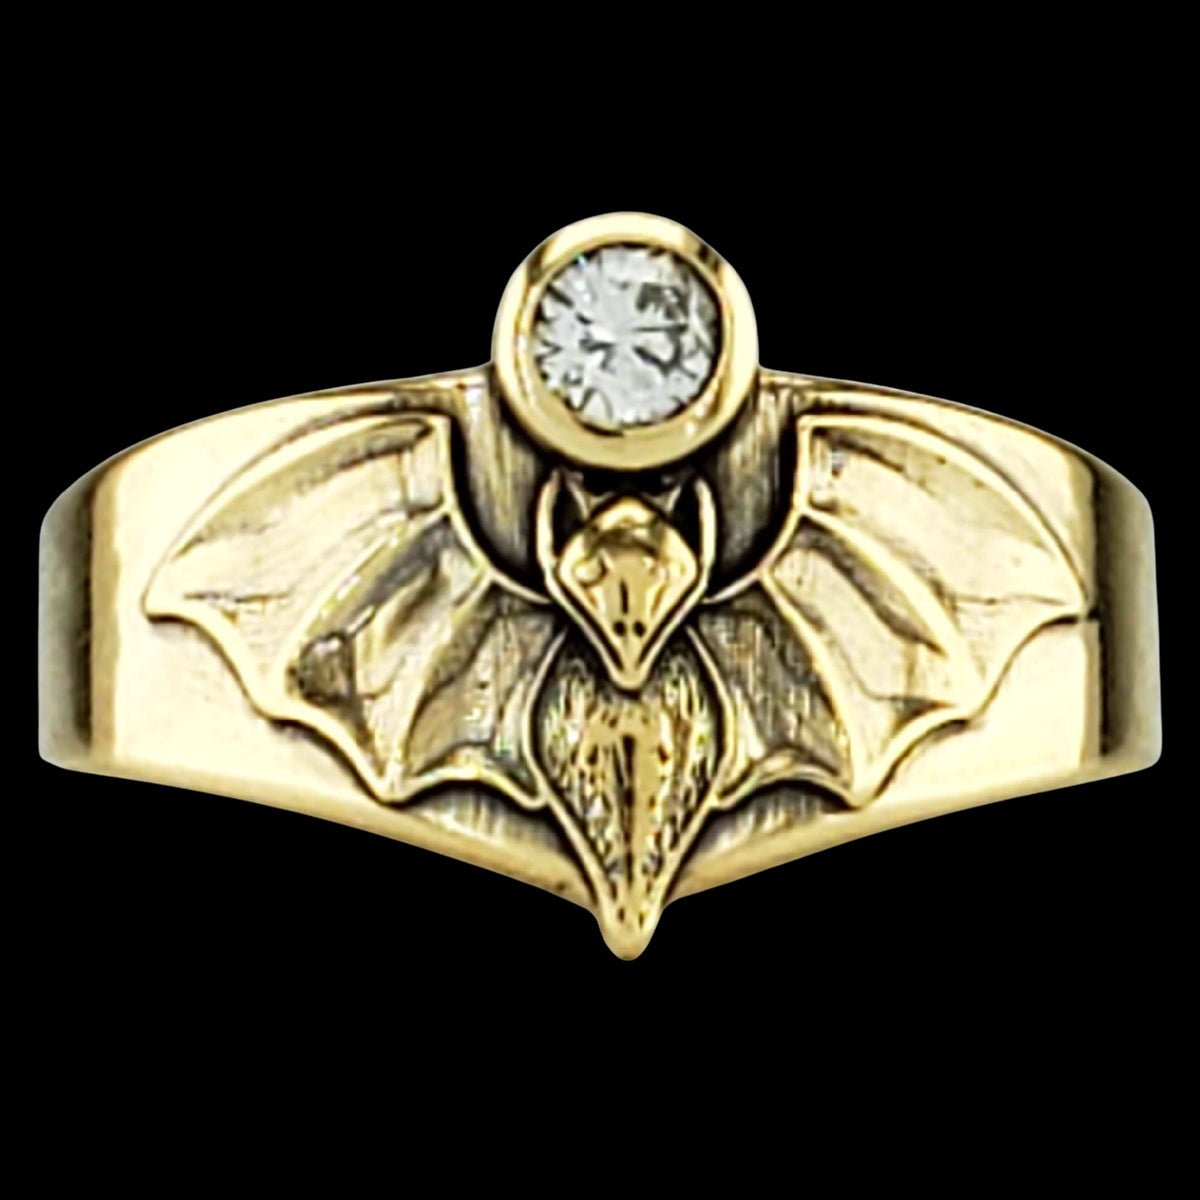 DIAMOND BAT SOLITAIRE Ring with 1/4CT NATURAL DIAMOND - INVENTORY SALE 14KT YELLOW GOLD $1299 SIZES 5-9 ONLY